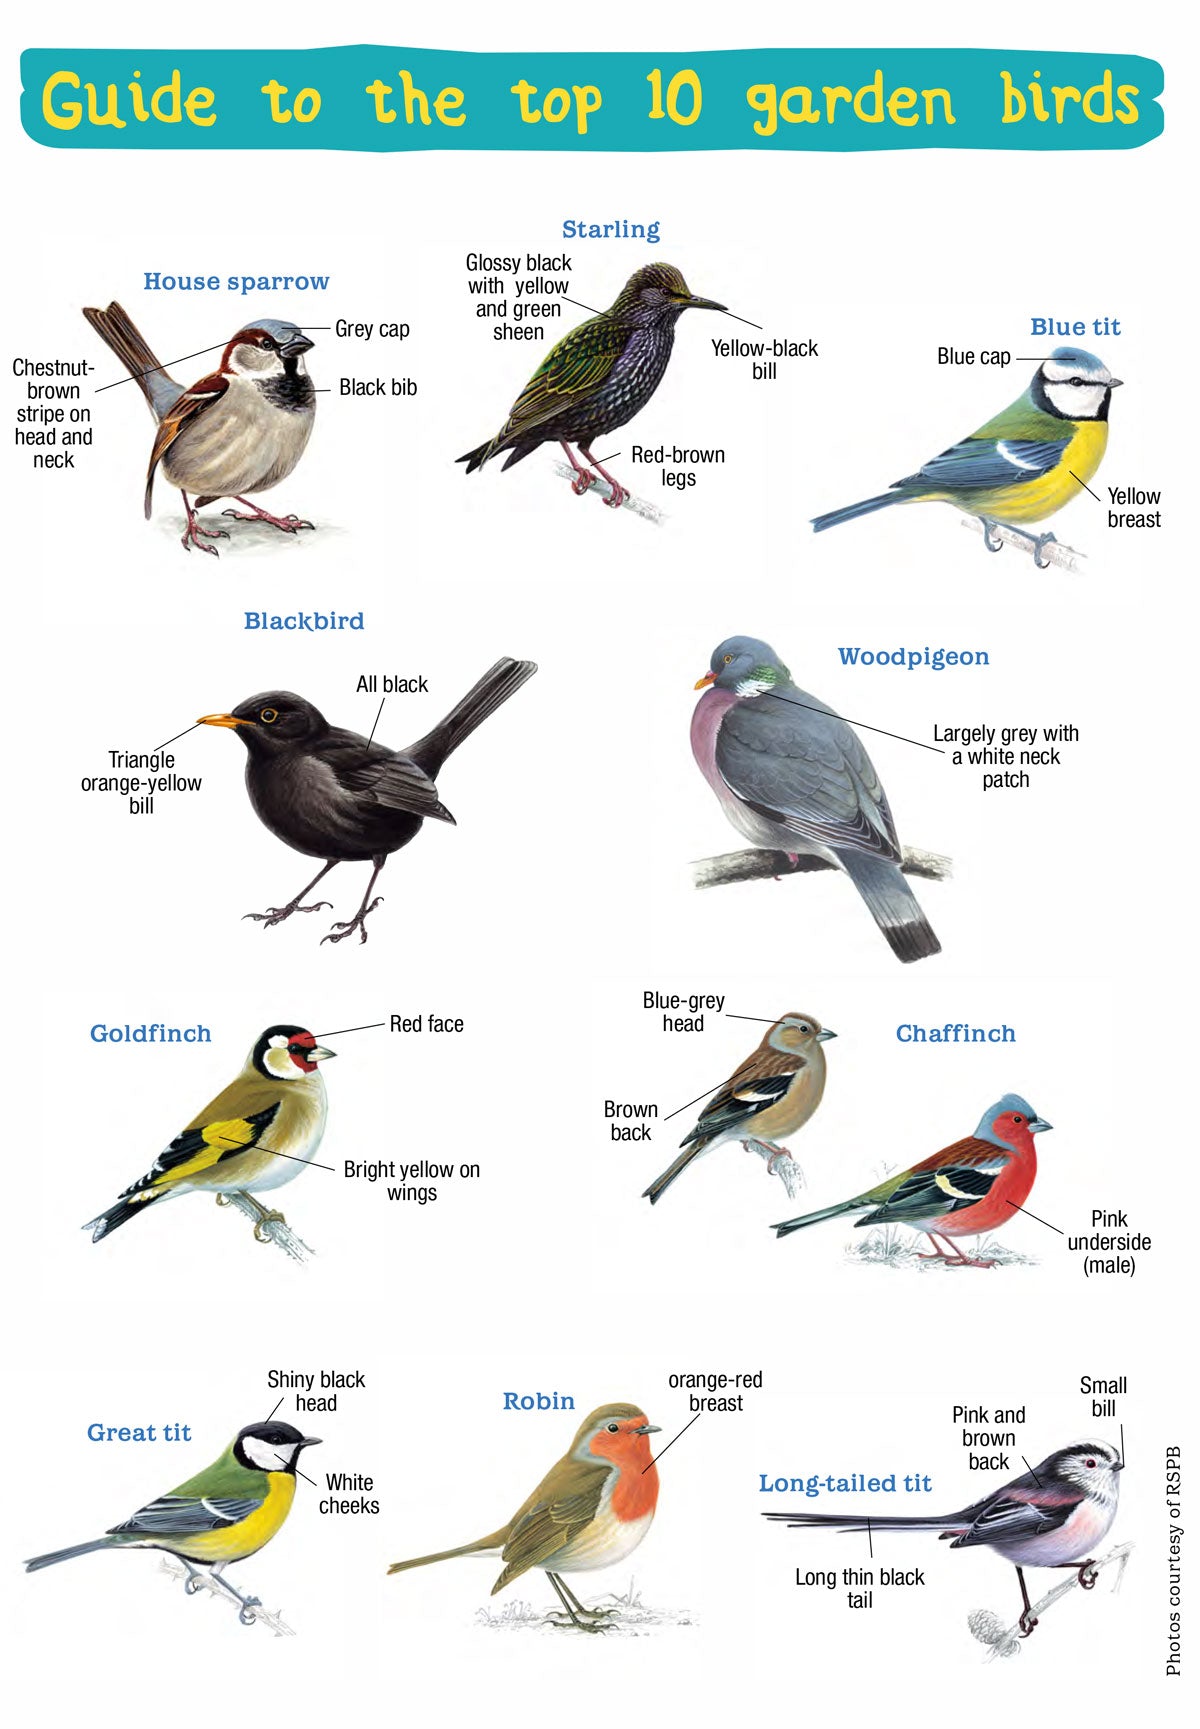 Guide to tit species in the UK: how to identify and where to see